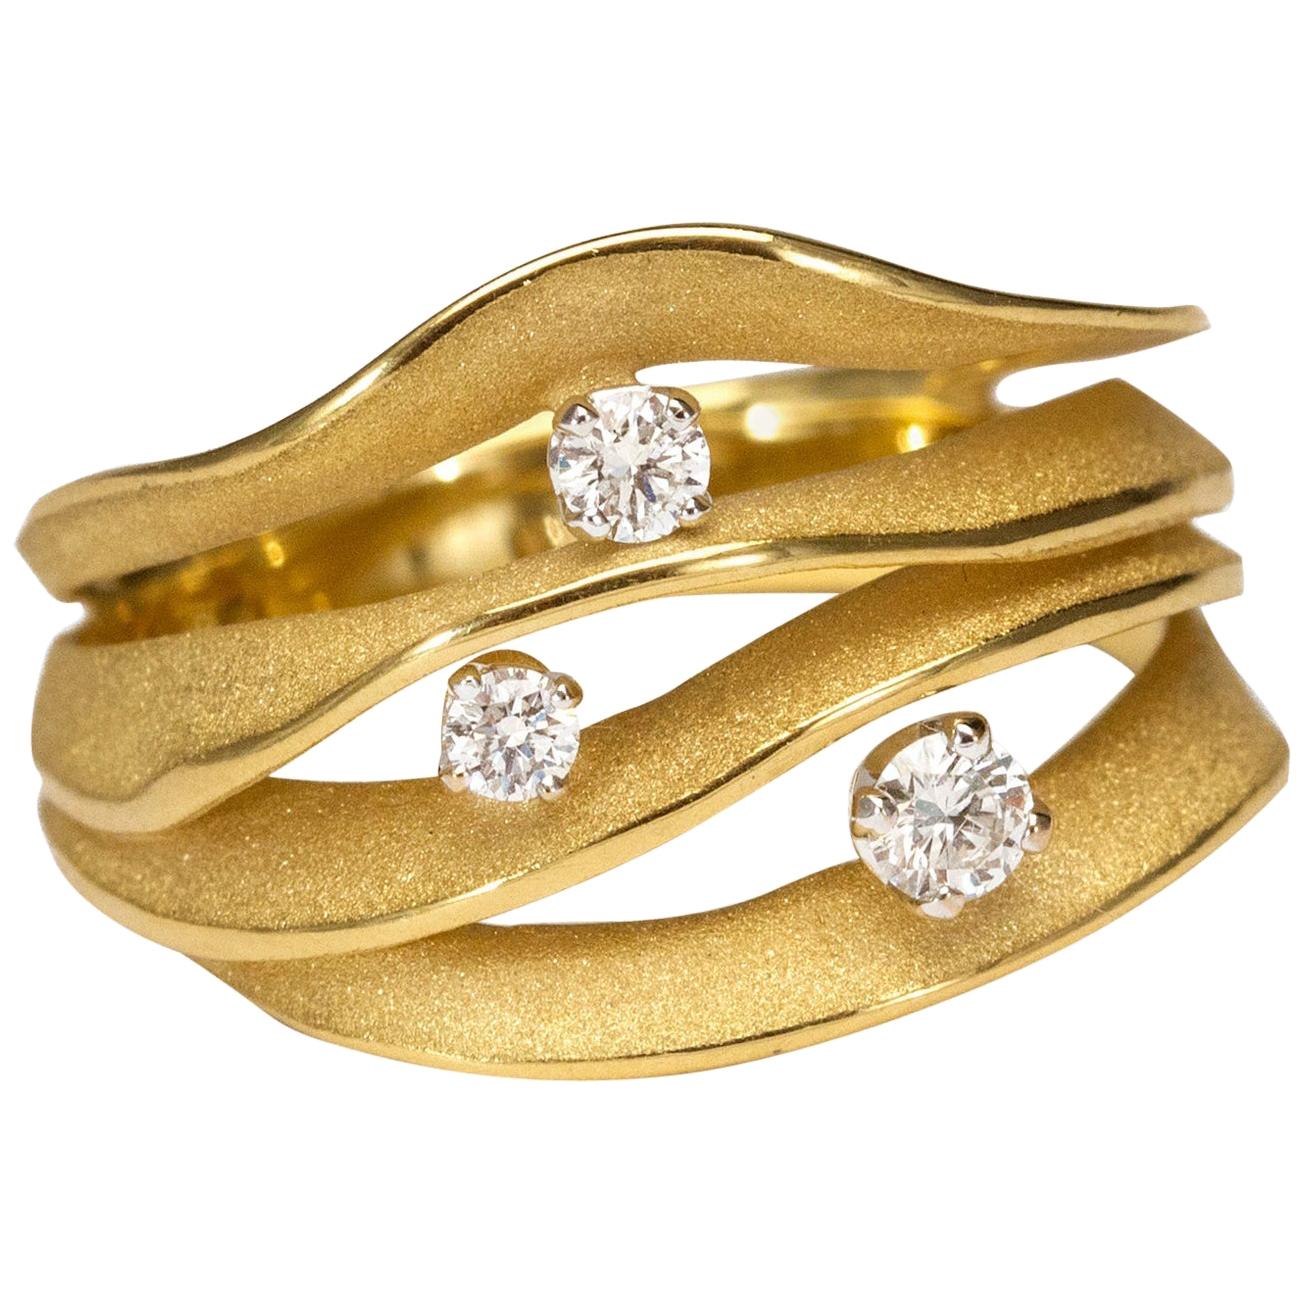 For Sale:  Annamaria Cammilli "Dune Royal" Ring with Diamonds in 18K Yellow Sunrise Gold